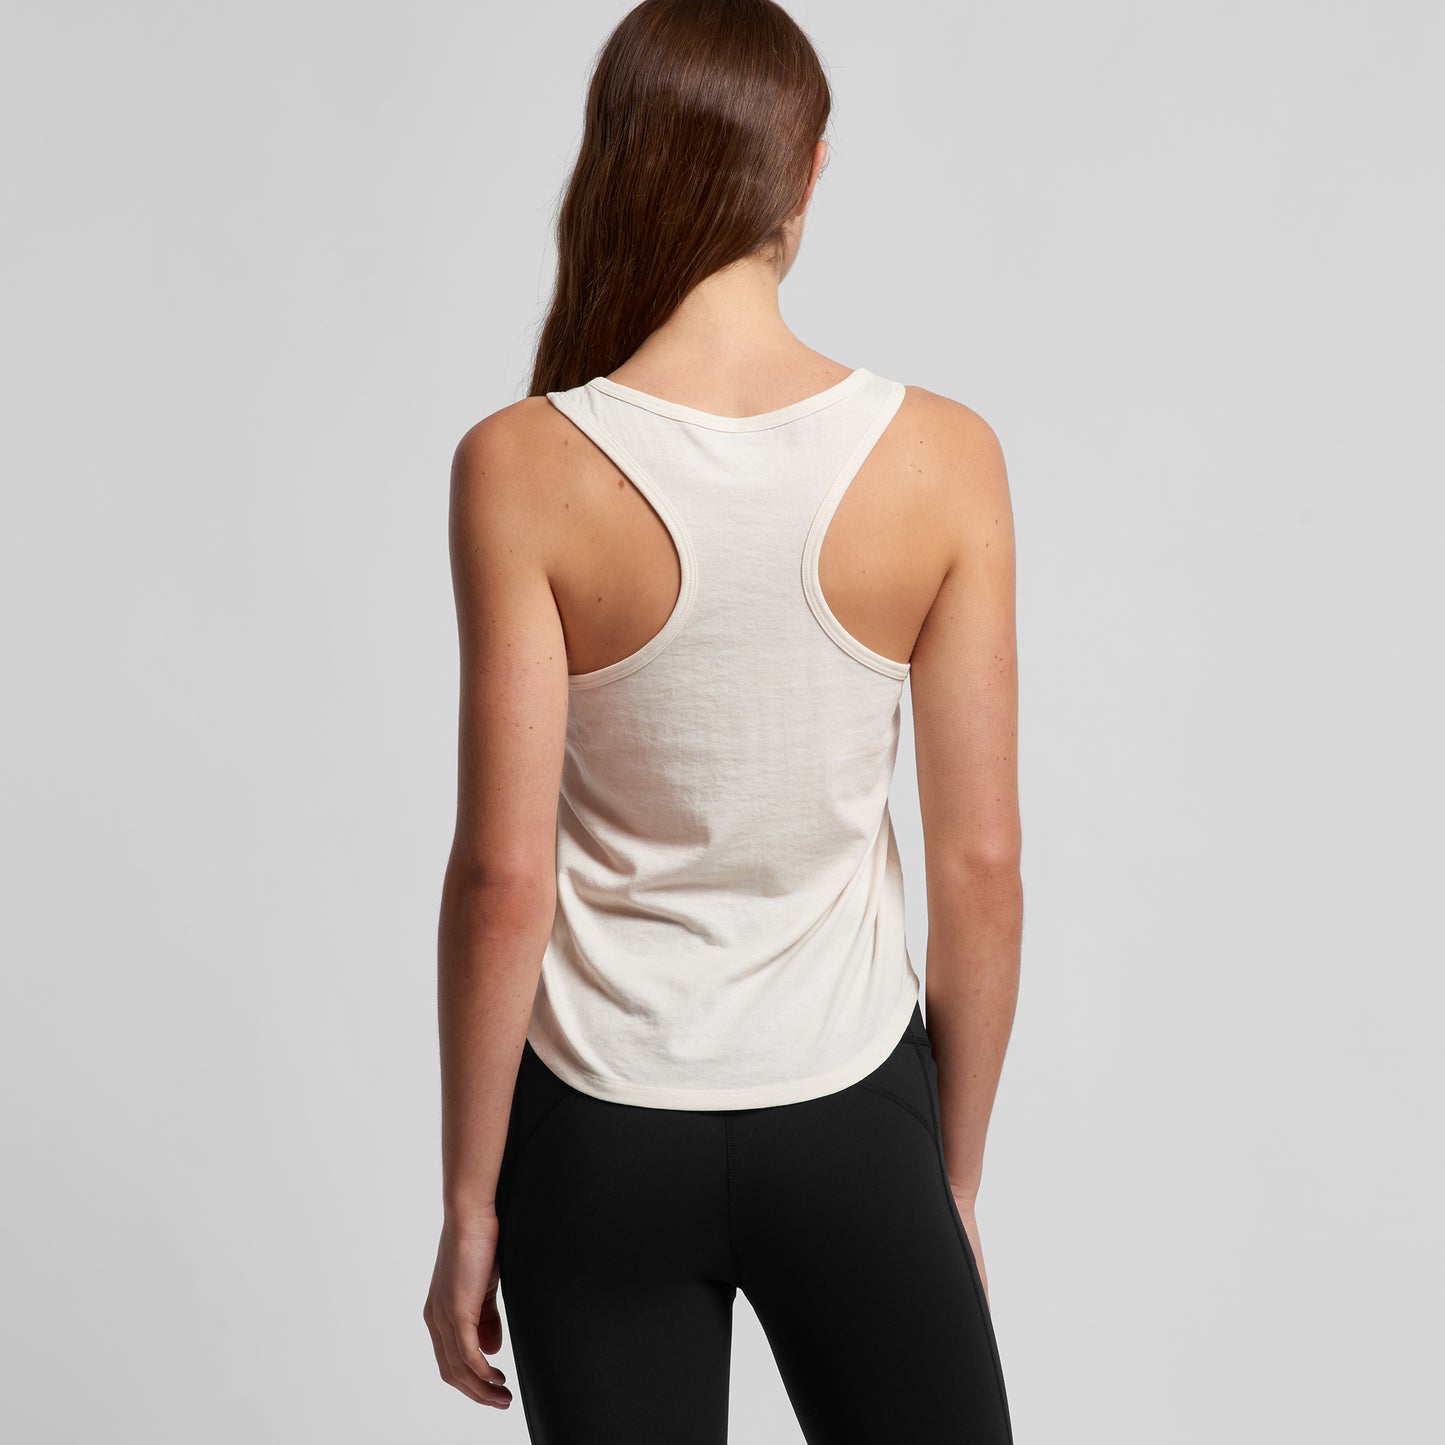 "Edible" Embroidered Women's Work Out Tank Top